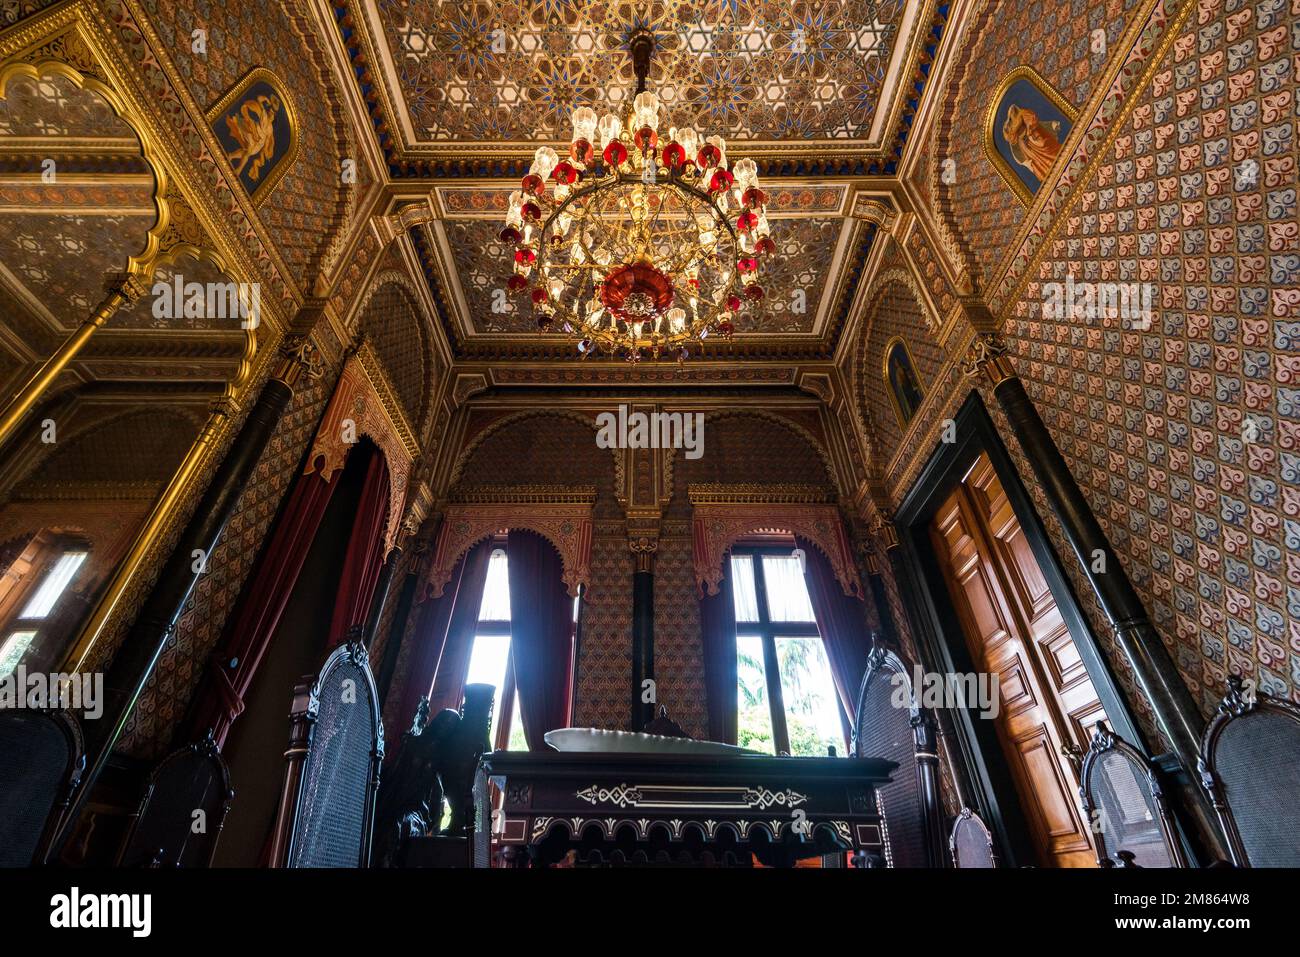 Rio de Janeiro, Brazil - January 3, 2023: Interior of Catete Palace, which is now dedicated to the Museum of history of the Brazilian Republic. Stock Photo